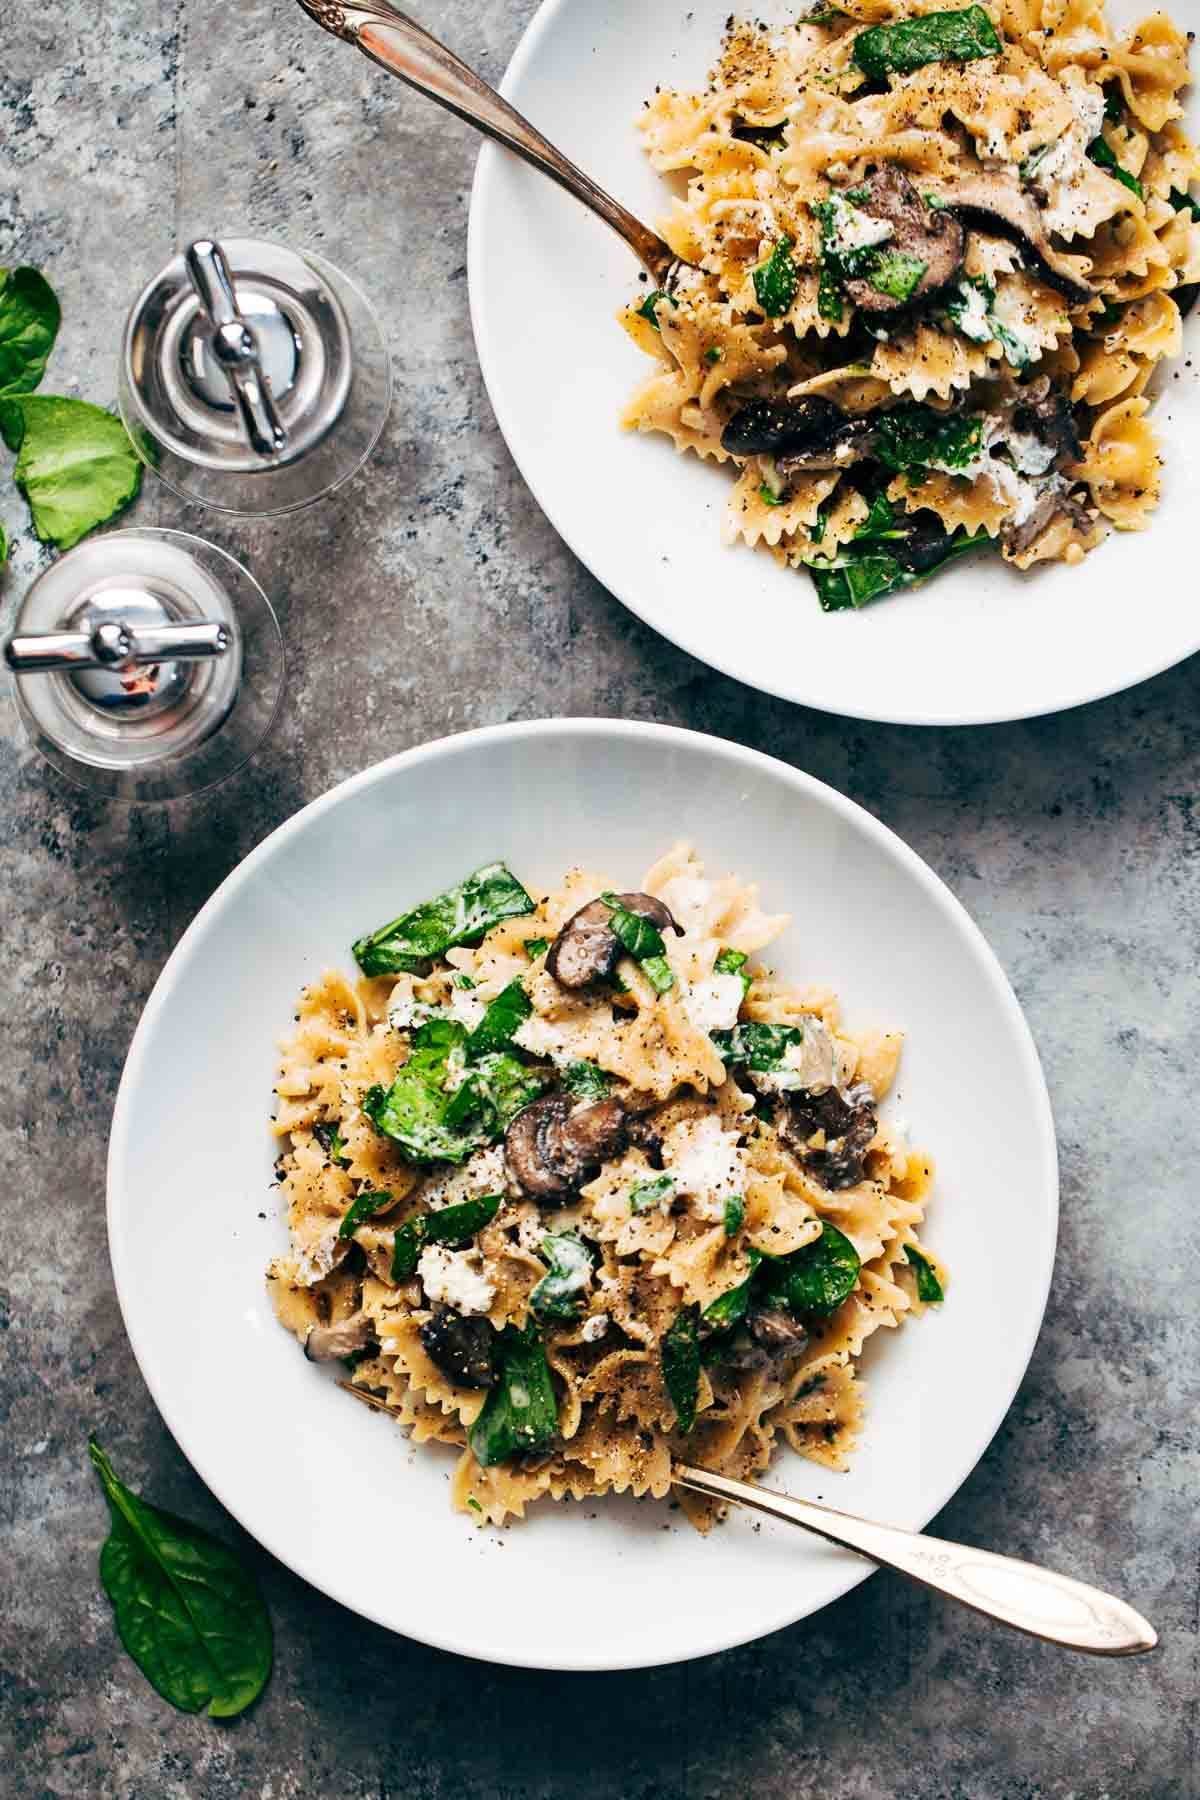 Date Night Mushroom Pasta with Goat Cheese - a simple, romantic meal involving white wine, mushrooms, spinach, pasta, and goat cheese! ♡